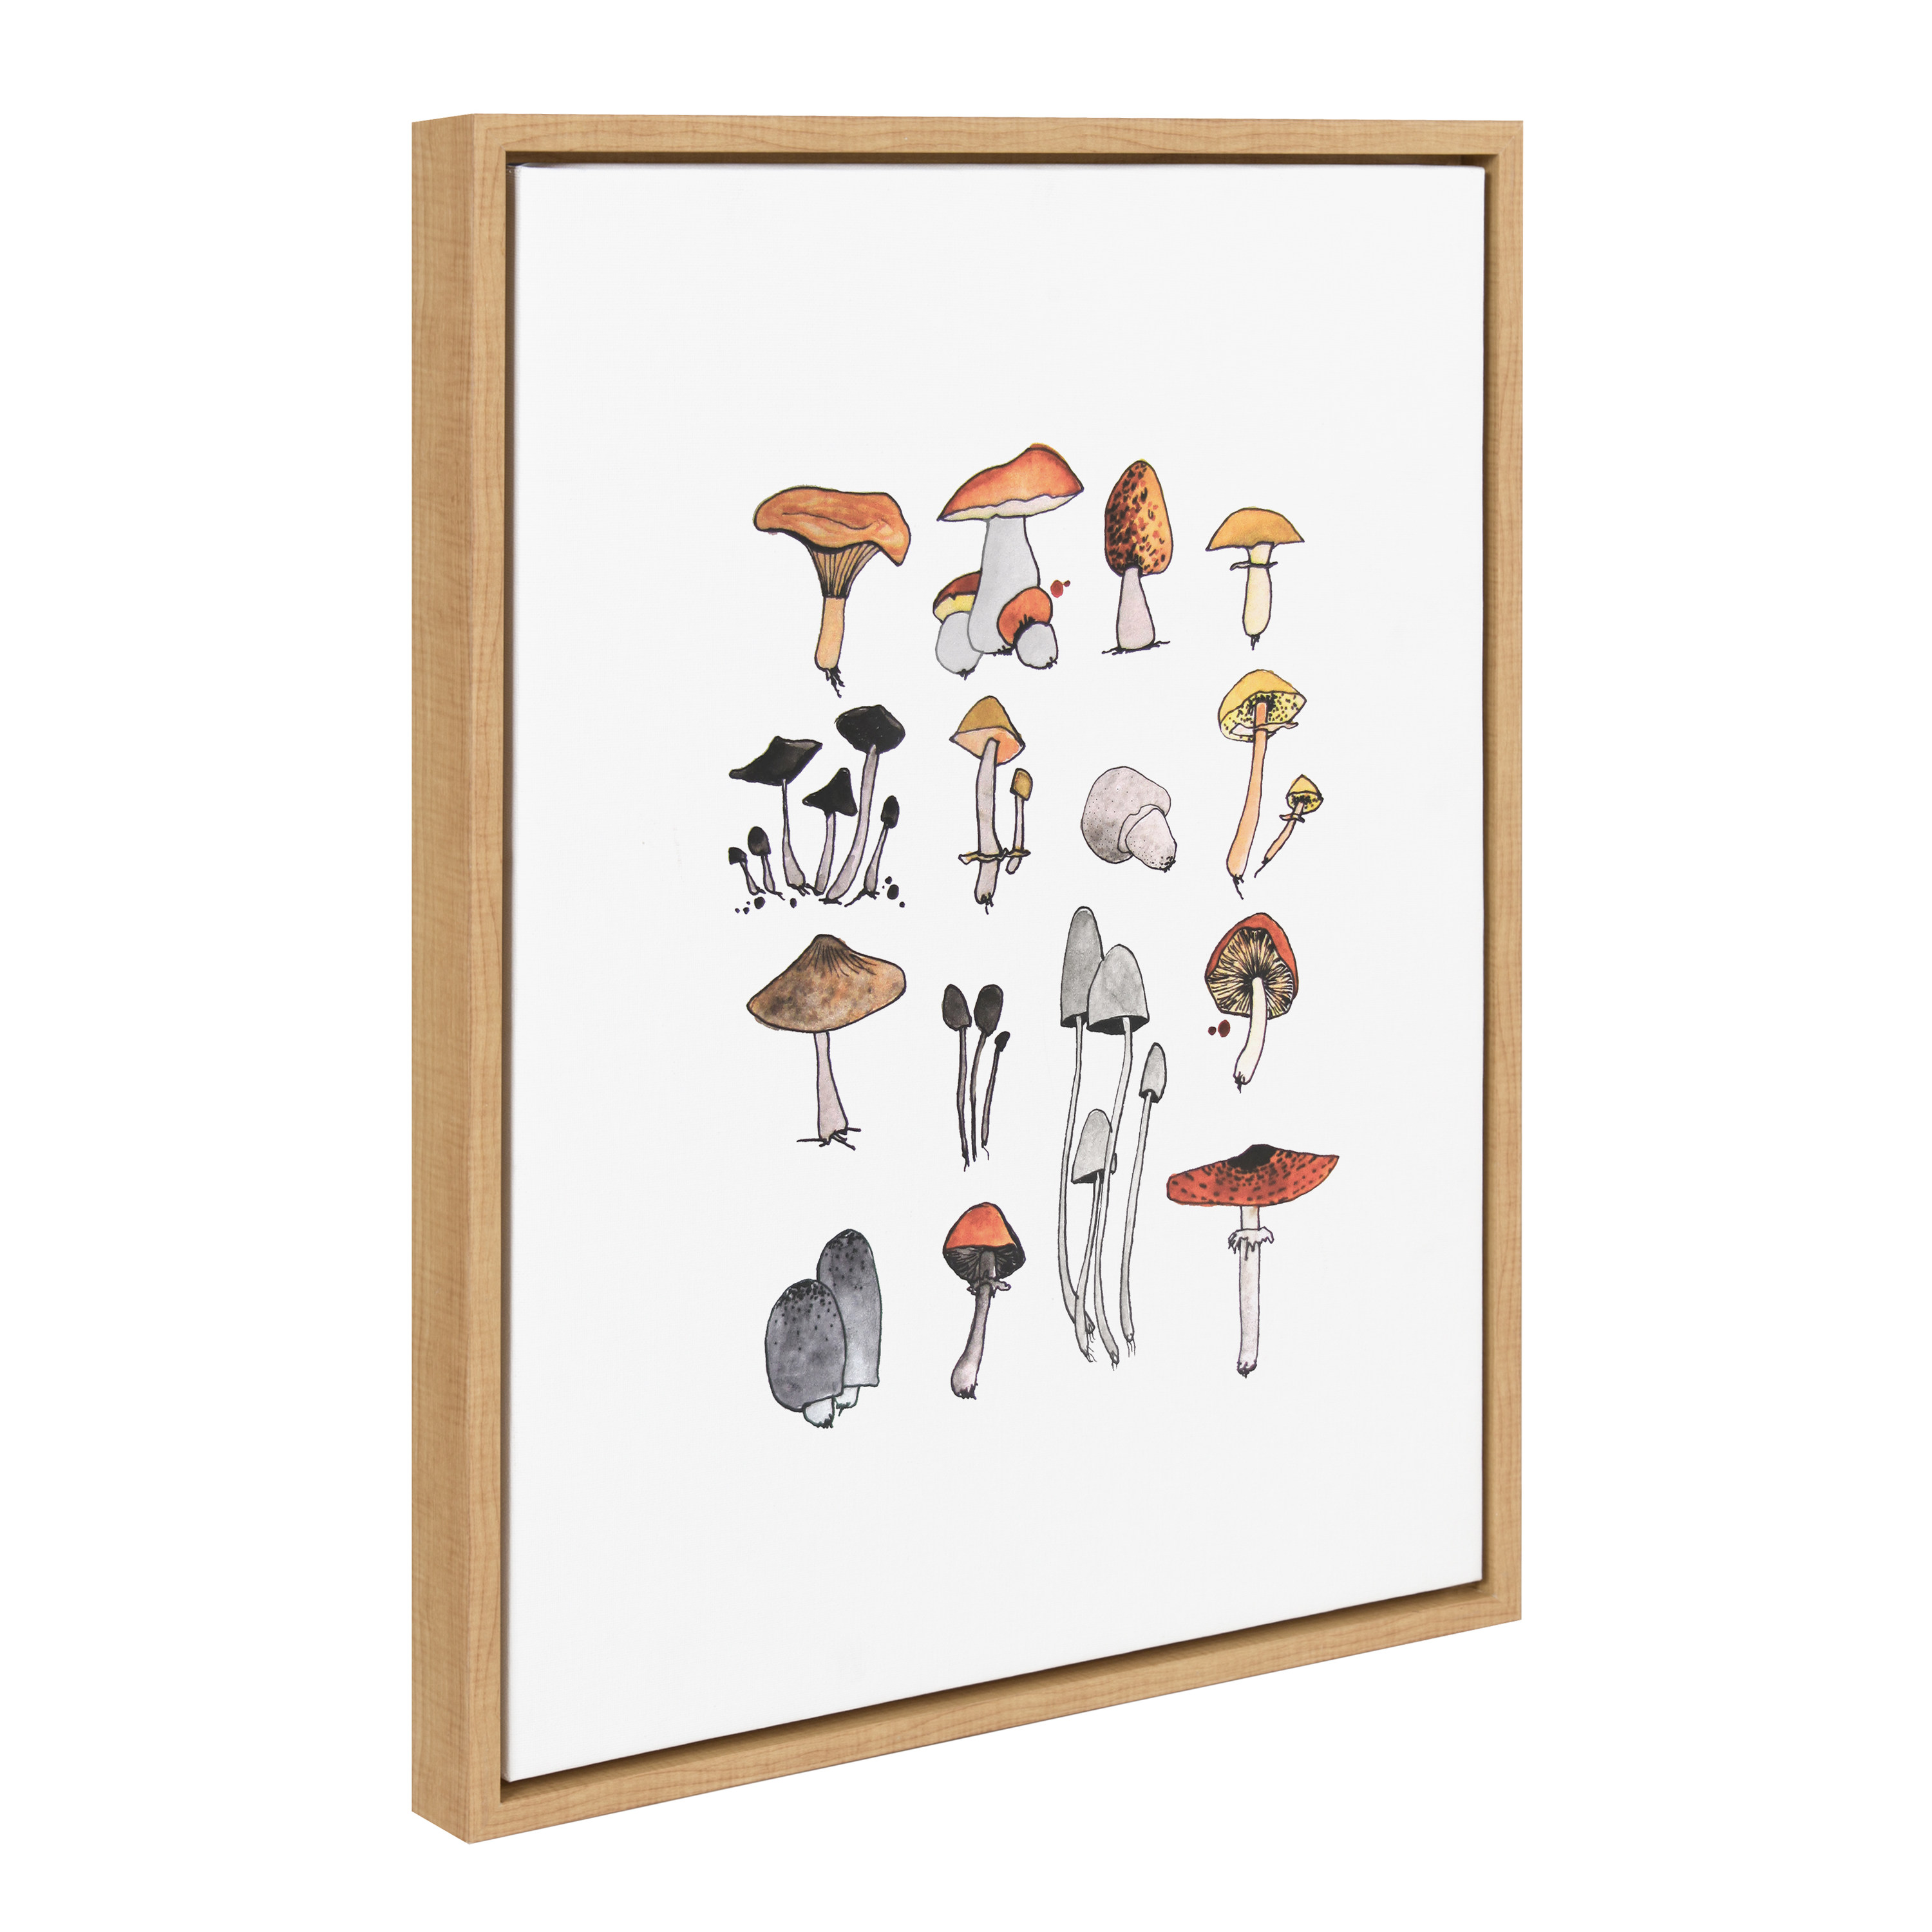 Kate and Laurel Sylvie Group of Mushrooms Framed Canvas Wall Art by Viola  Kreczmer, 18x24 Natural, Whimsical Food Art for Wall